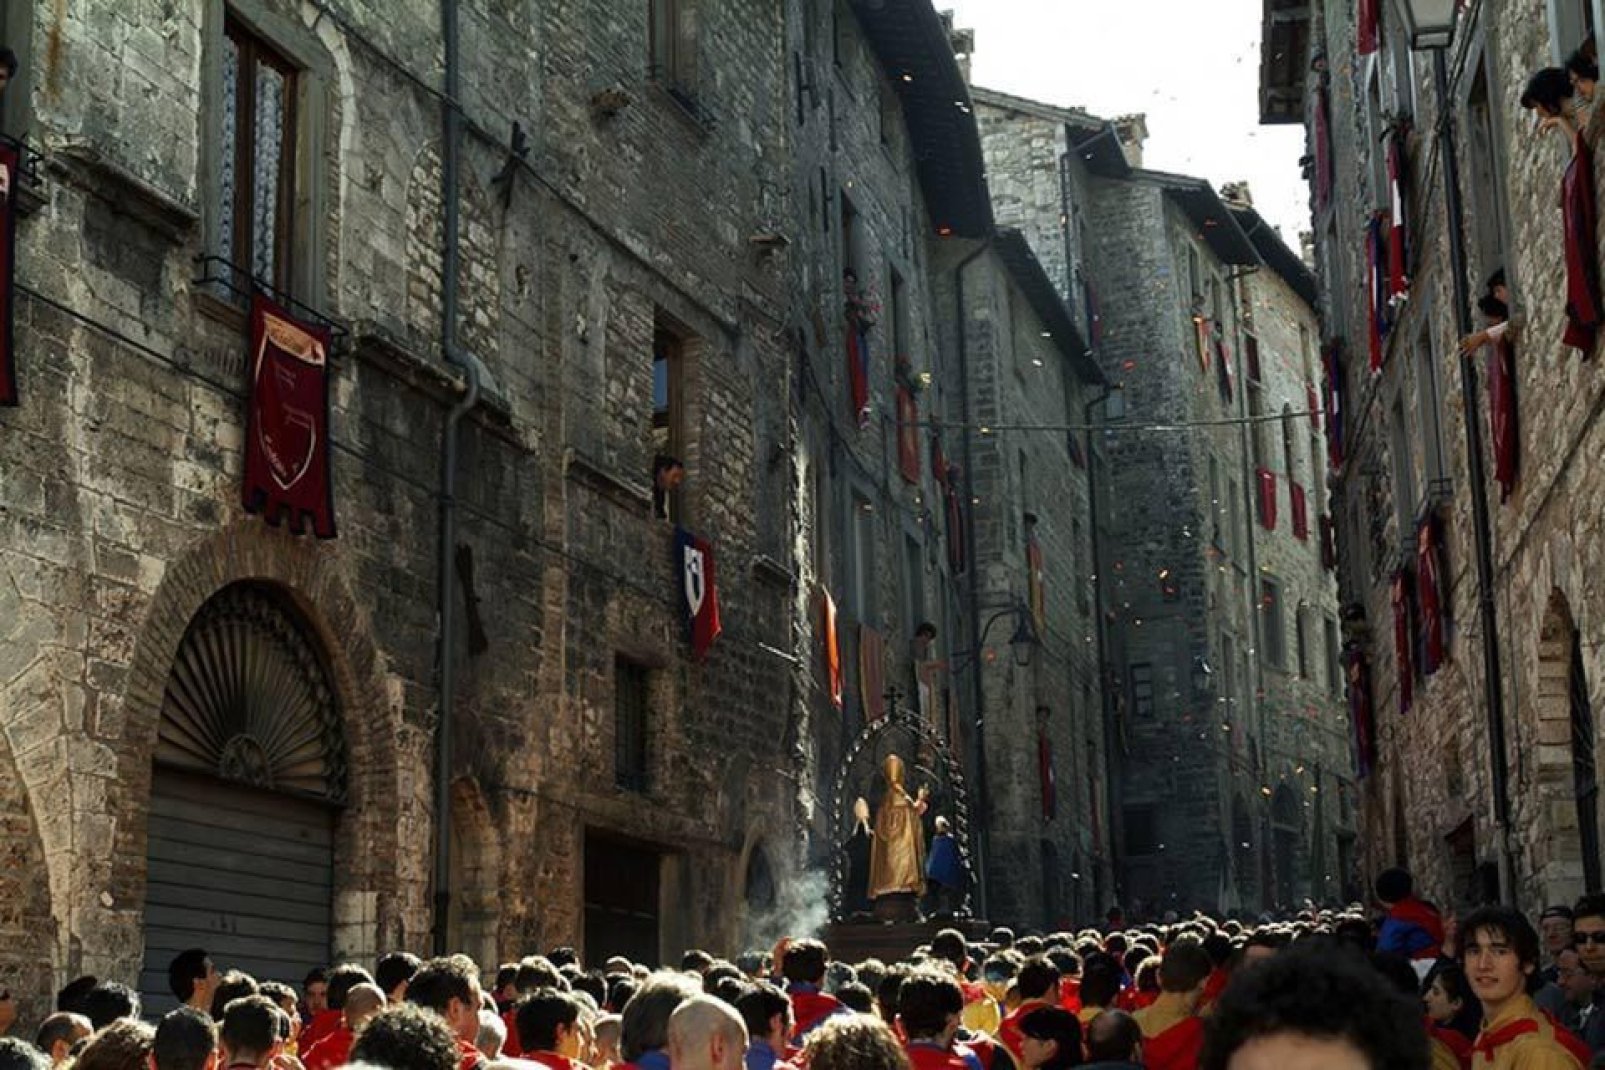 The Festa dei Ceri takes place in Gubbio on 15th May: traditionally this is a celebration that honours Saint Ubaldo Baldassini, the bishop and patron of the city.